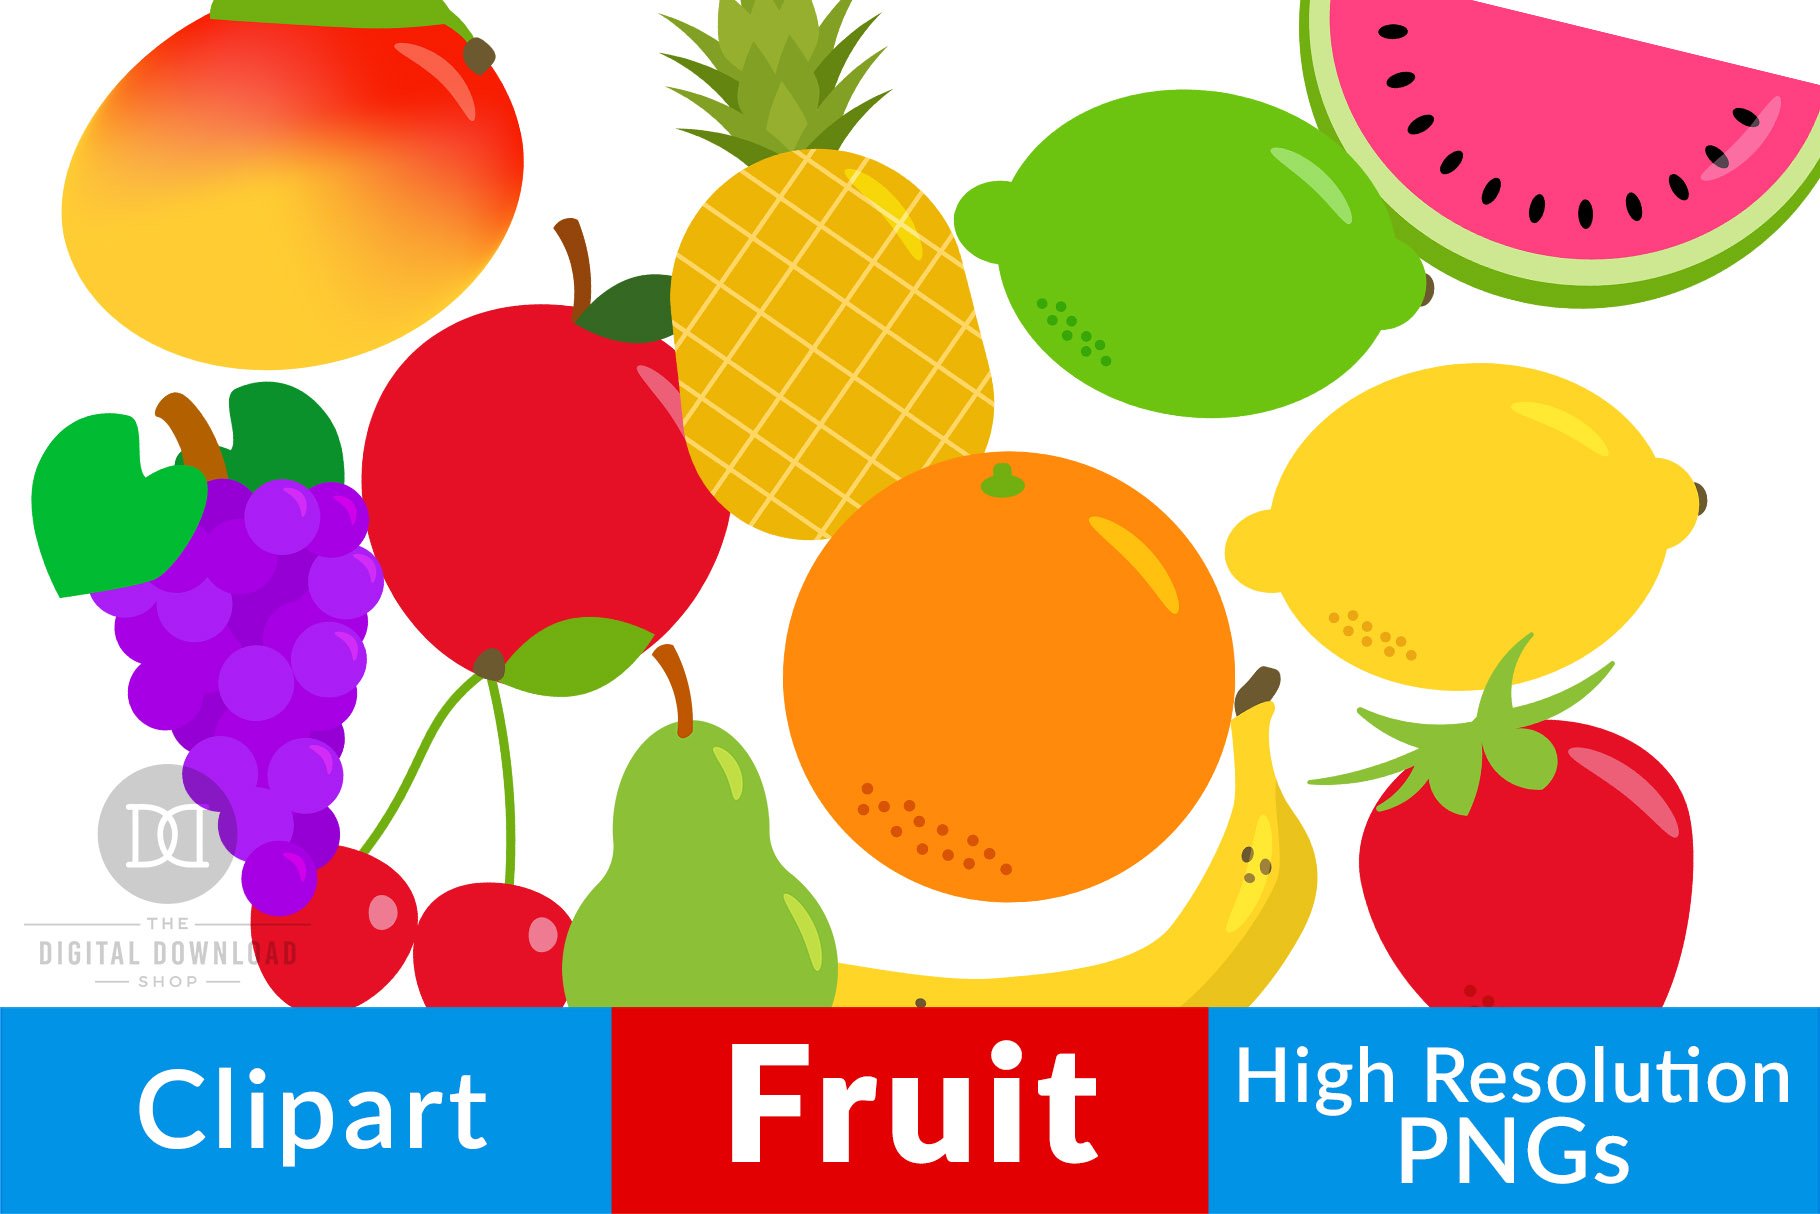 Fruit Clipart, Healthy Foods cover image.